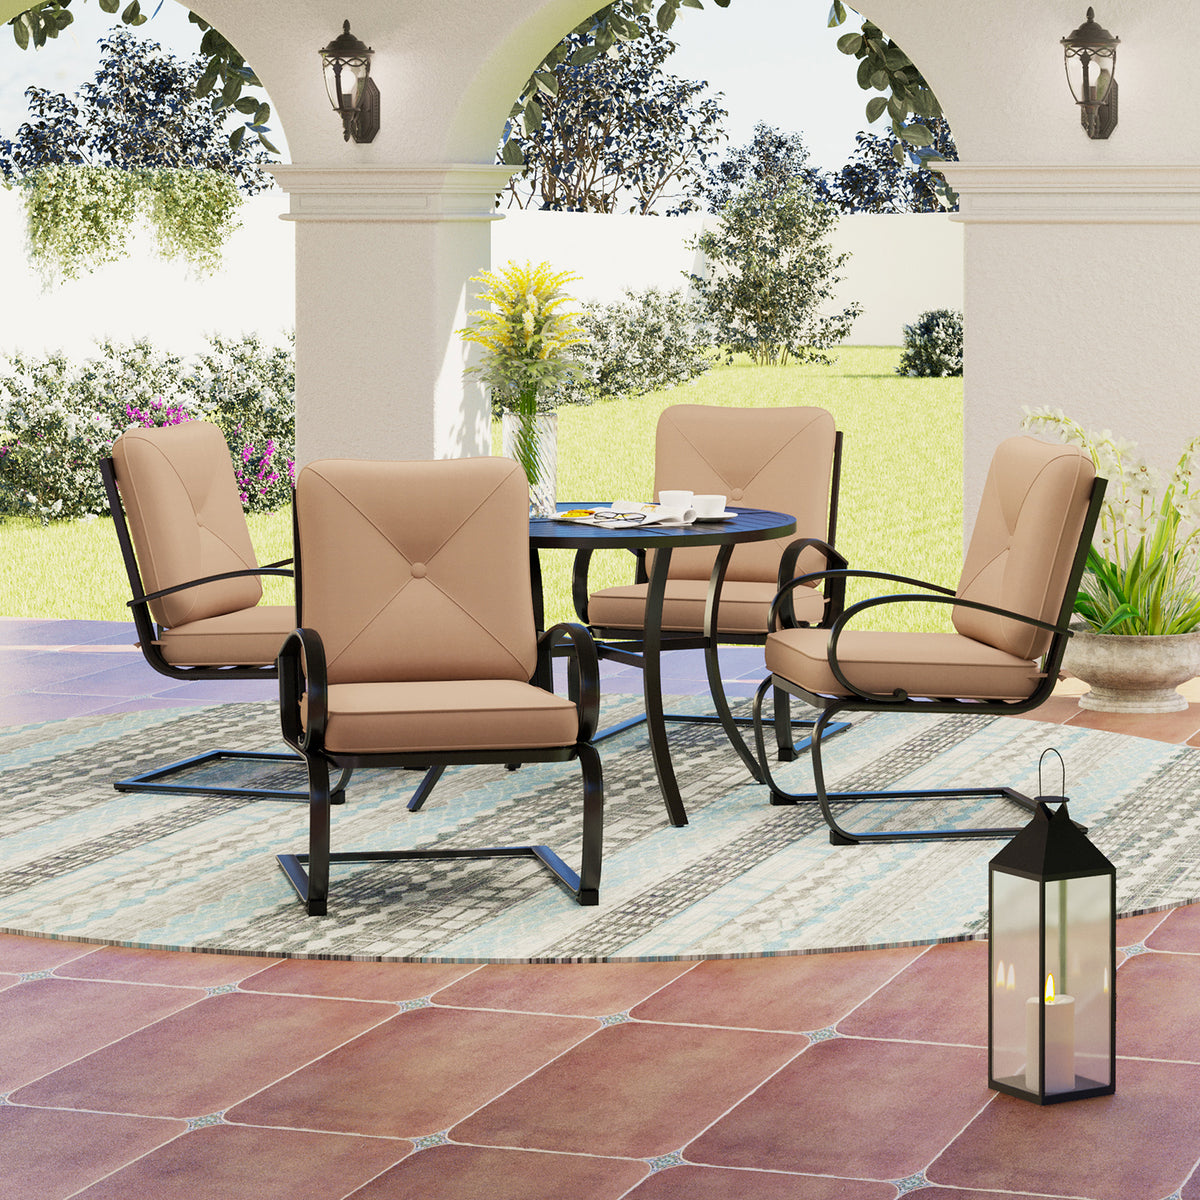 Sophia & William 5-Piece Geometrically Stamped Round Table & C-spring Dining Chairs Outdoor Patio Dining Sets